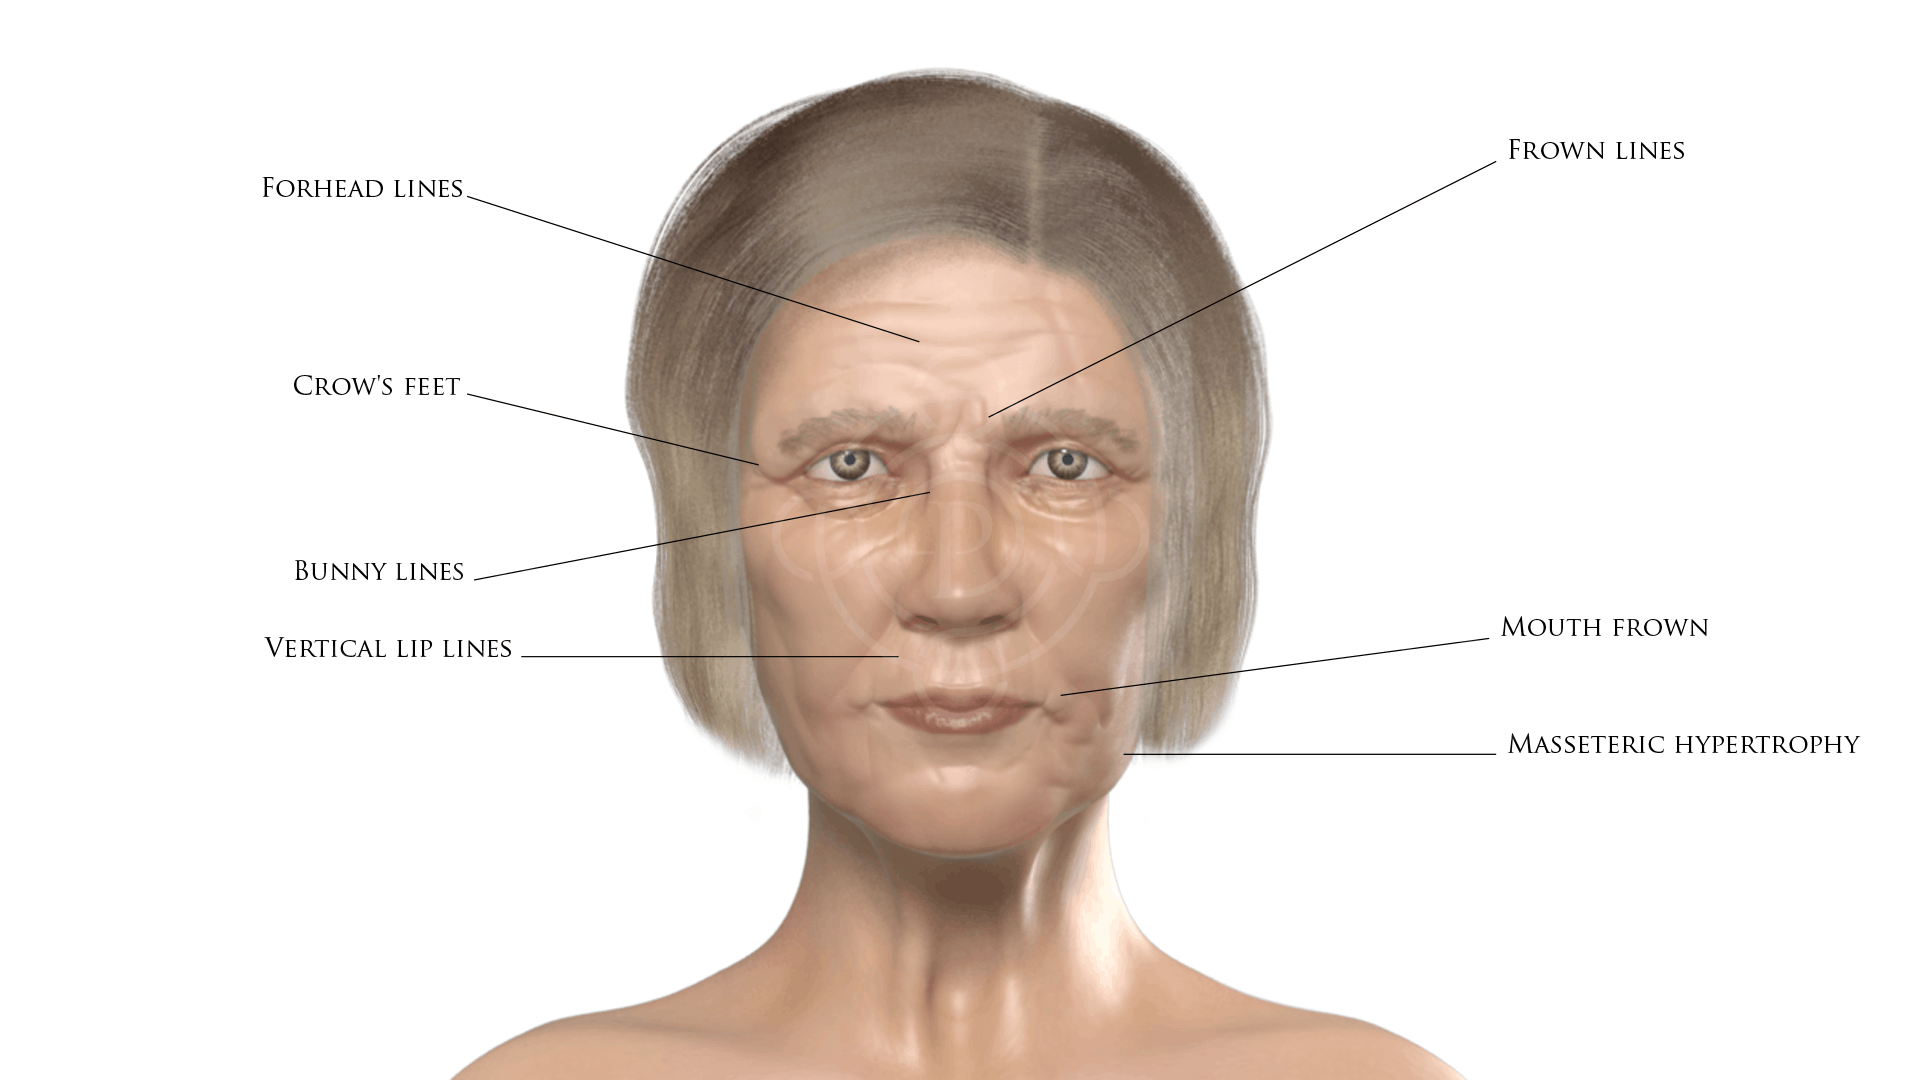 Botox for Forehead Line, Frown Lines, Crow's feet, Bunny Lines, Vertical Lip Lines, Mouth Frown, Masseteric Hypertrophy